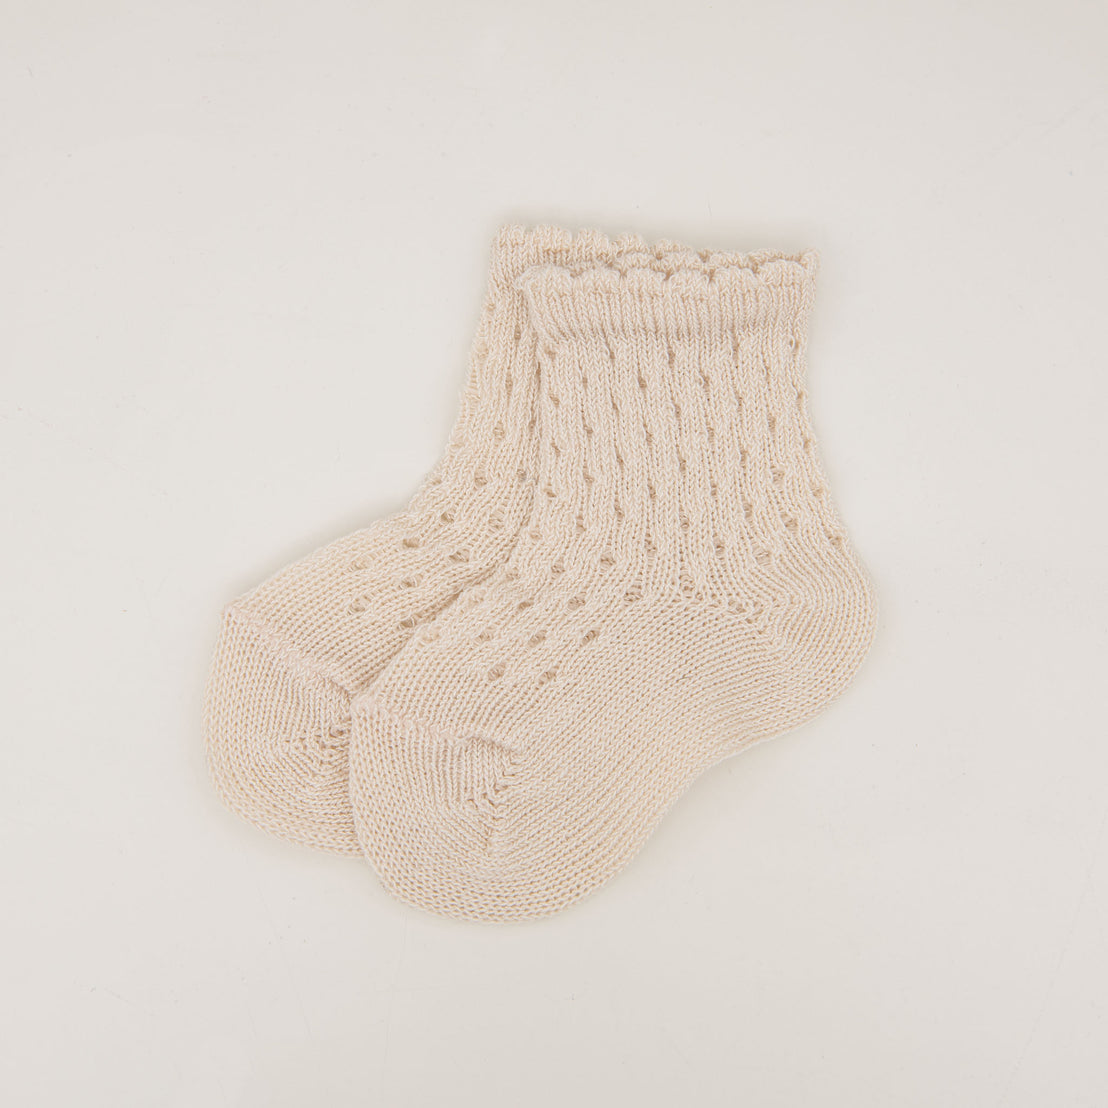 A pair of cozy, beige Scallop Edge Crochet Socks displayed on a plain white background, featuring a ribbed design with delicate patterns near the cuffs.